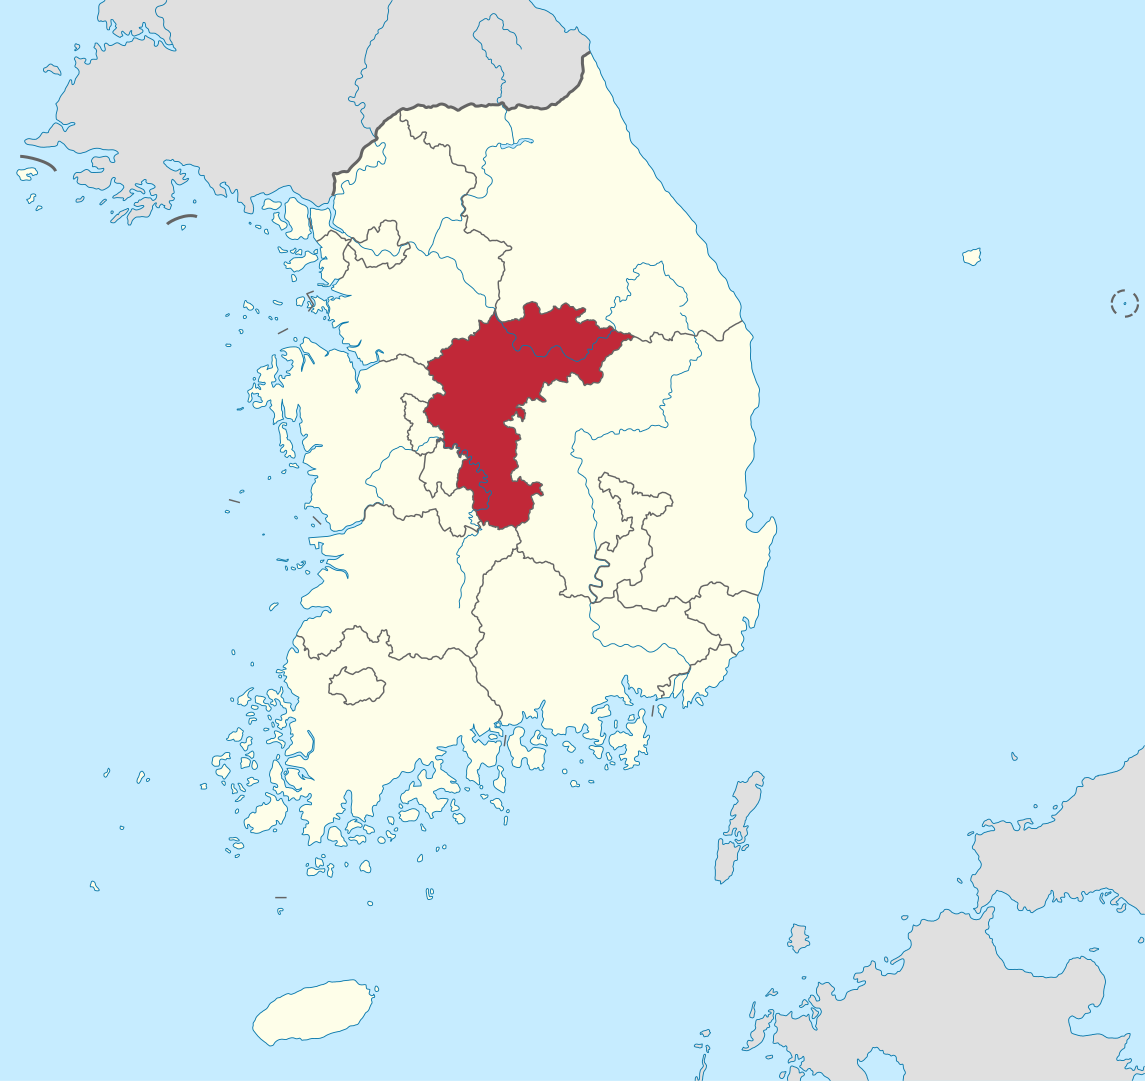 North Chungcheong Province on a map of South Korea.